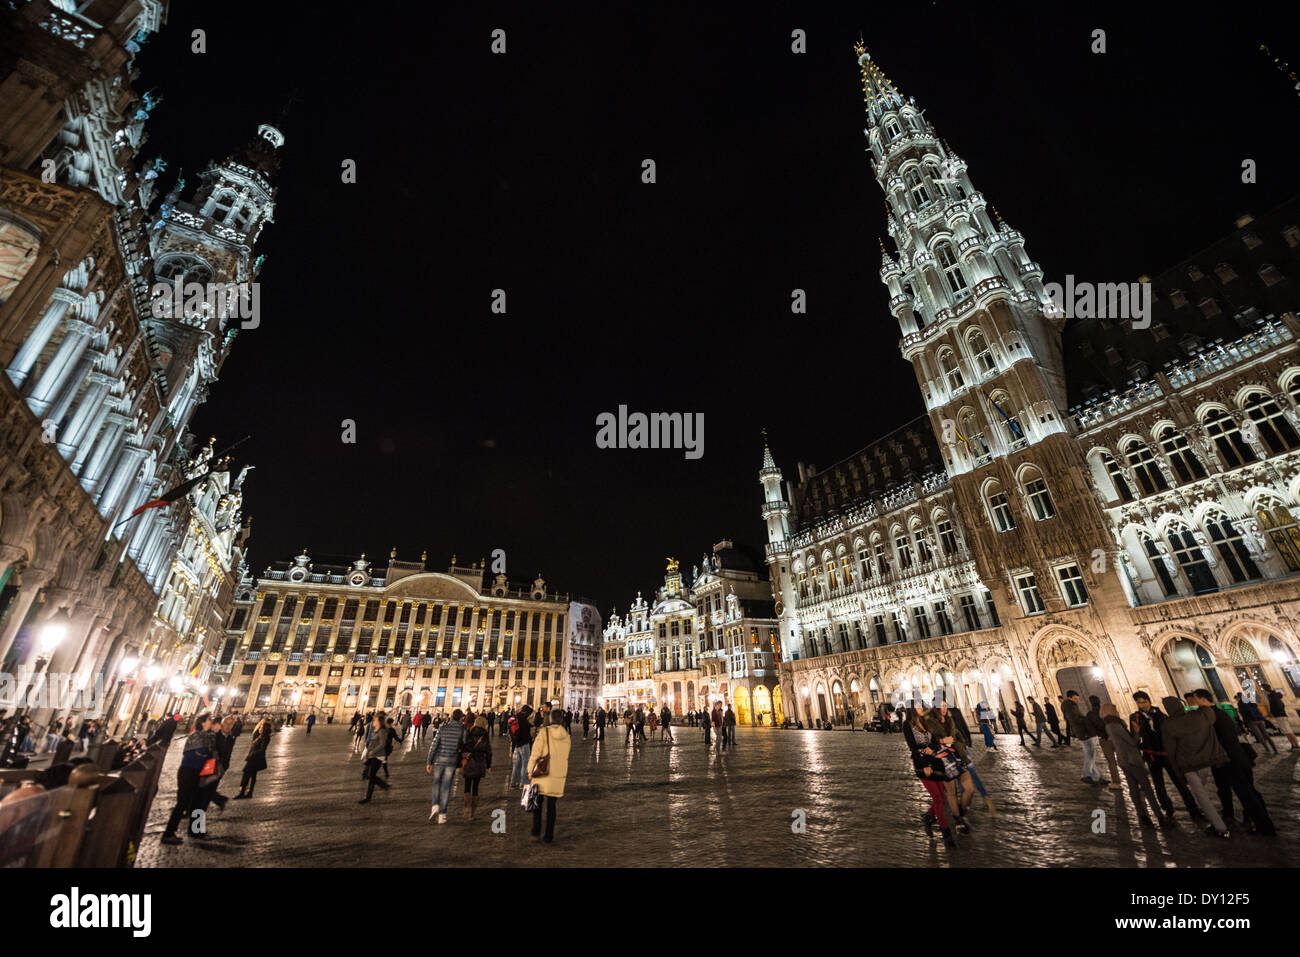 Night at Grand Place (La Grand-Place), a UNESCO World Heritage Site in central Brussels, Belgium. Lined with ornate, historic buildings, the cobblestone square is the primary tourist attraction in Brussels. Stock Photo